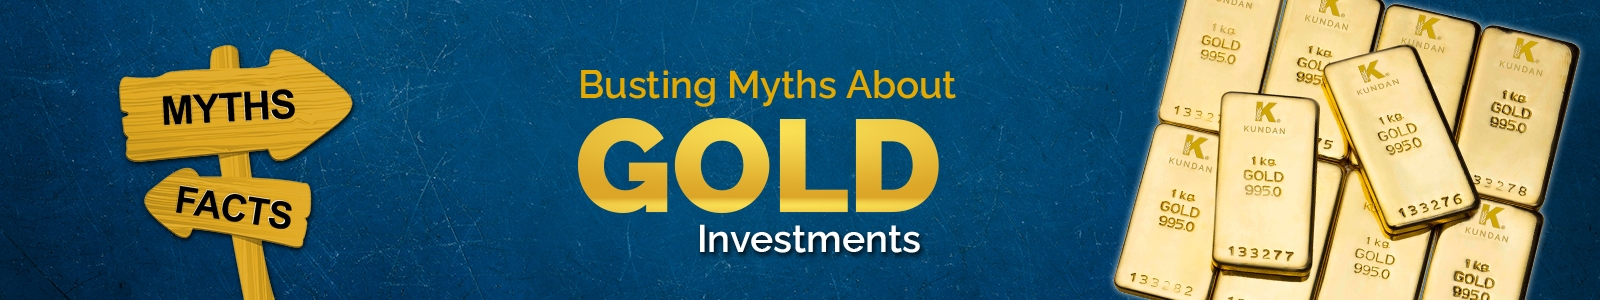 Busting Myths About Gold Investments